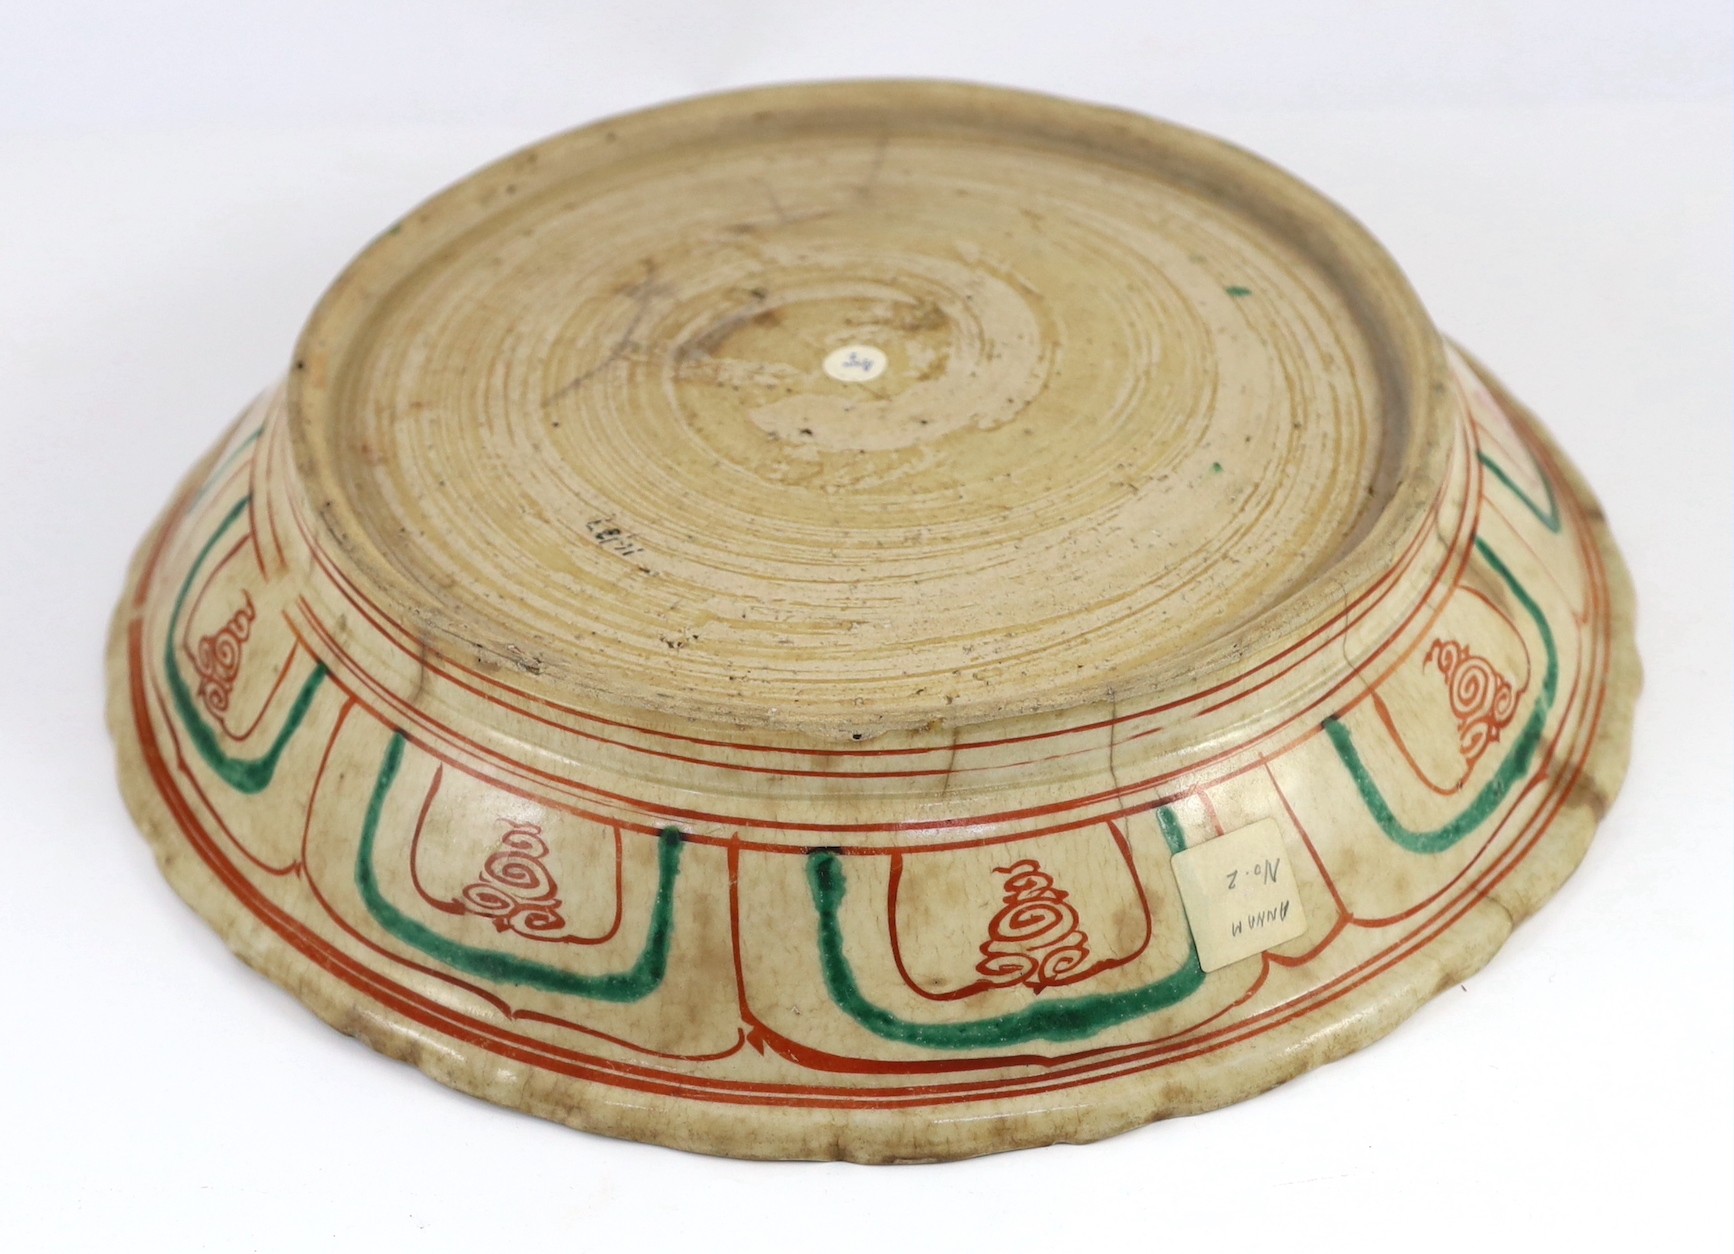 An Annamese polychrome ‘bird’ dish, 15th-16th century, 34.5cm diameter, stained and with cracks